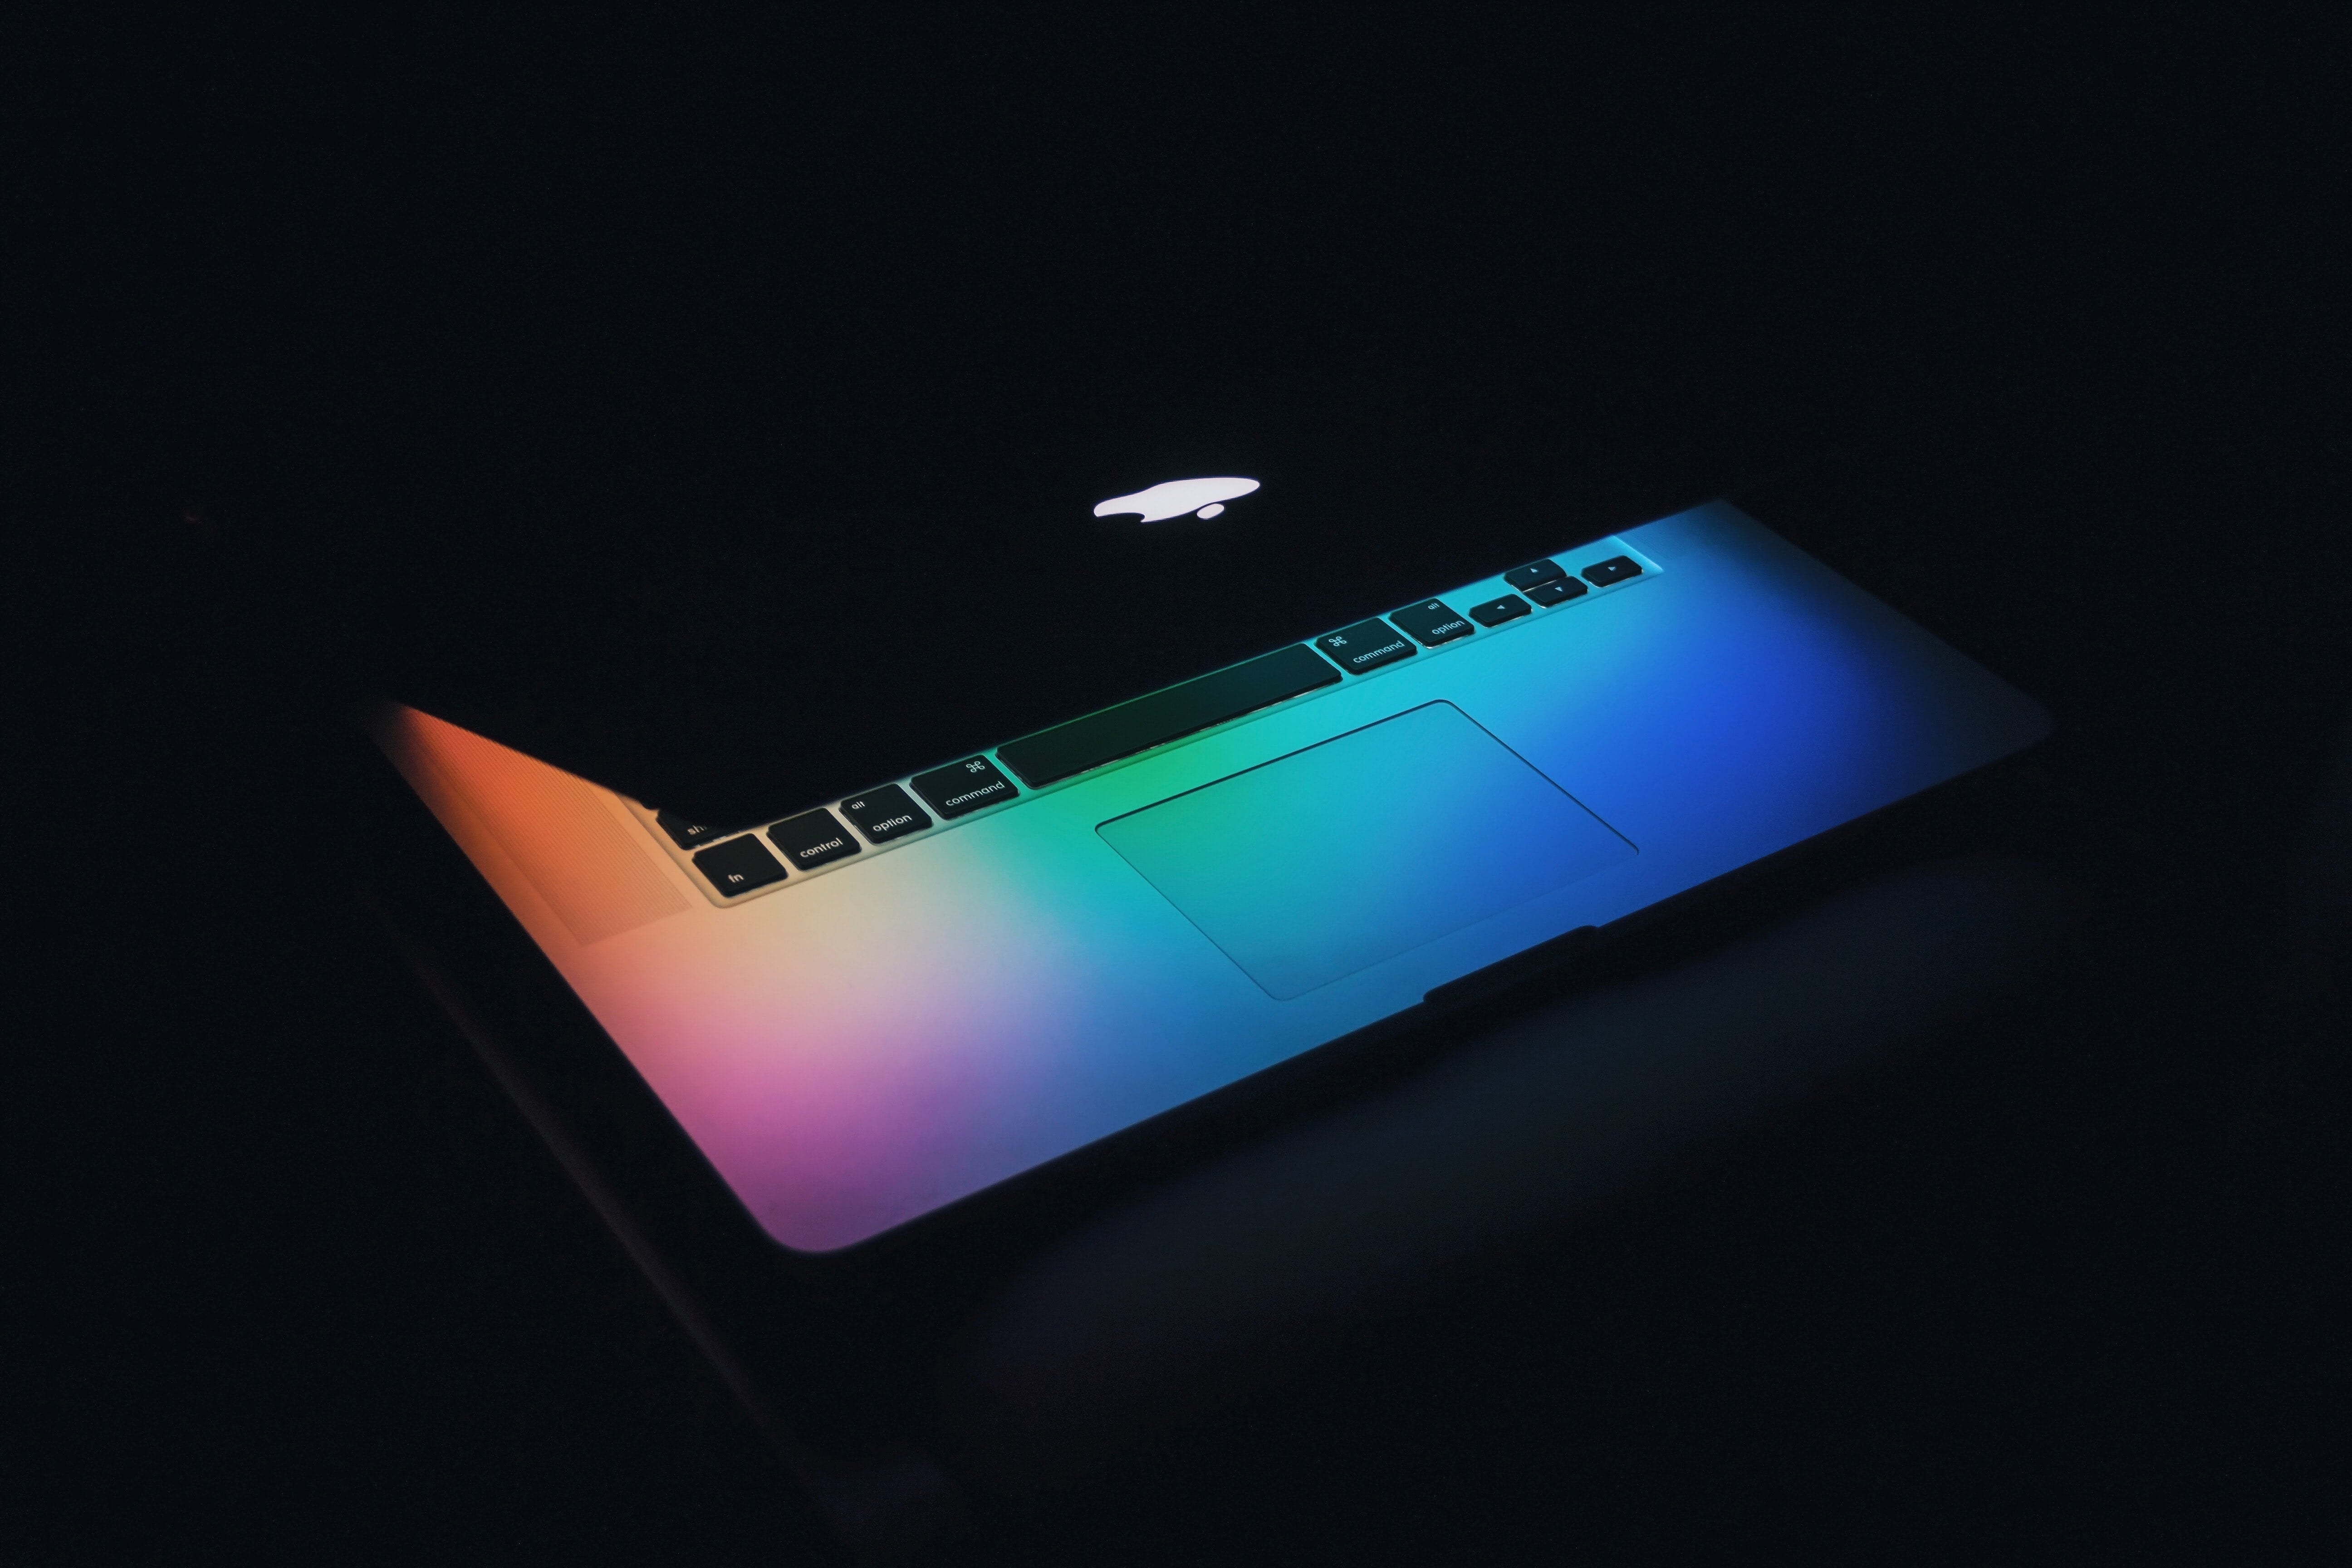 Macbook laptop in the dark projecting rainbow colours from screen